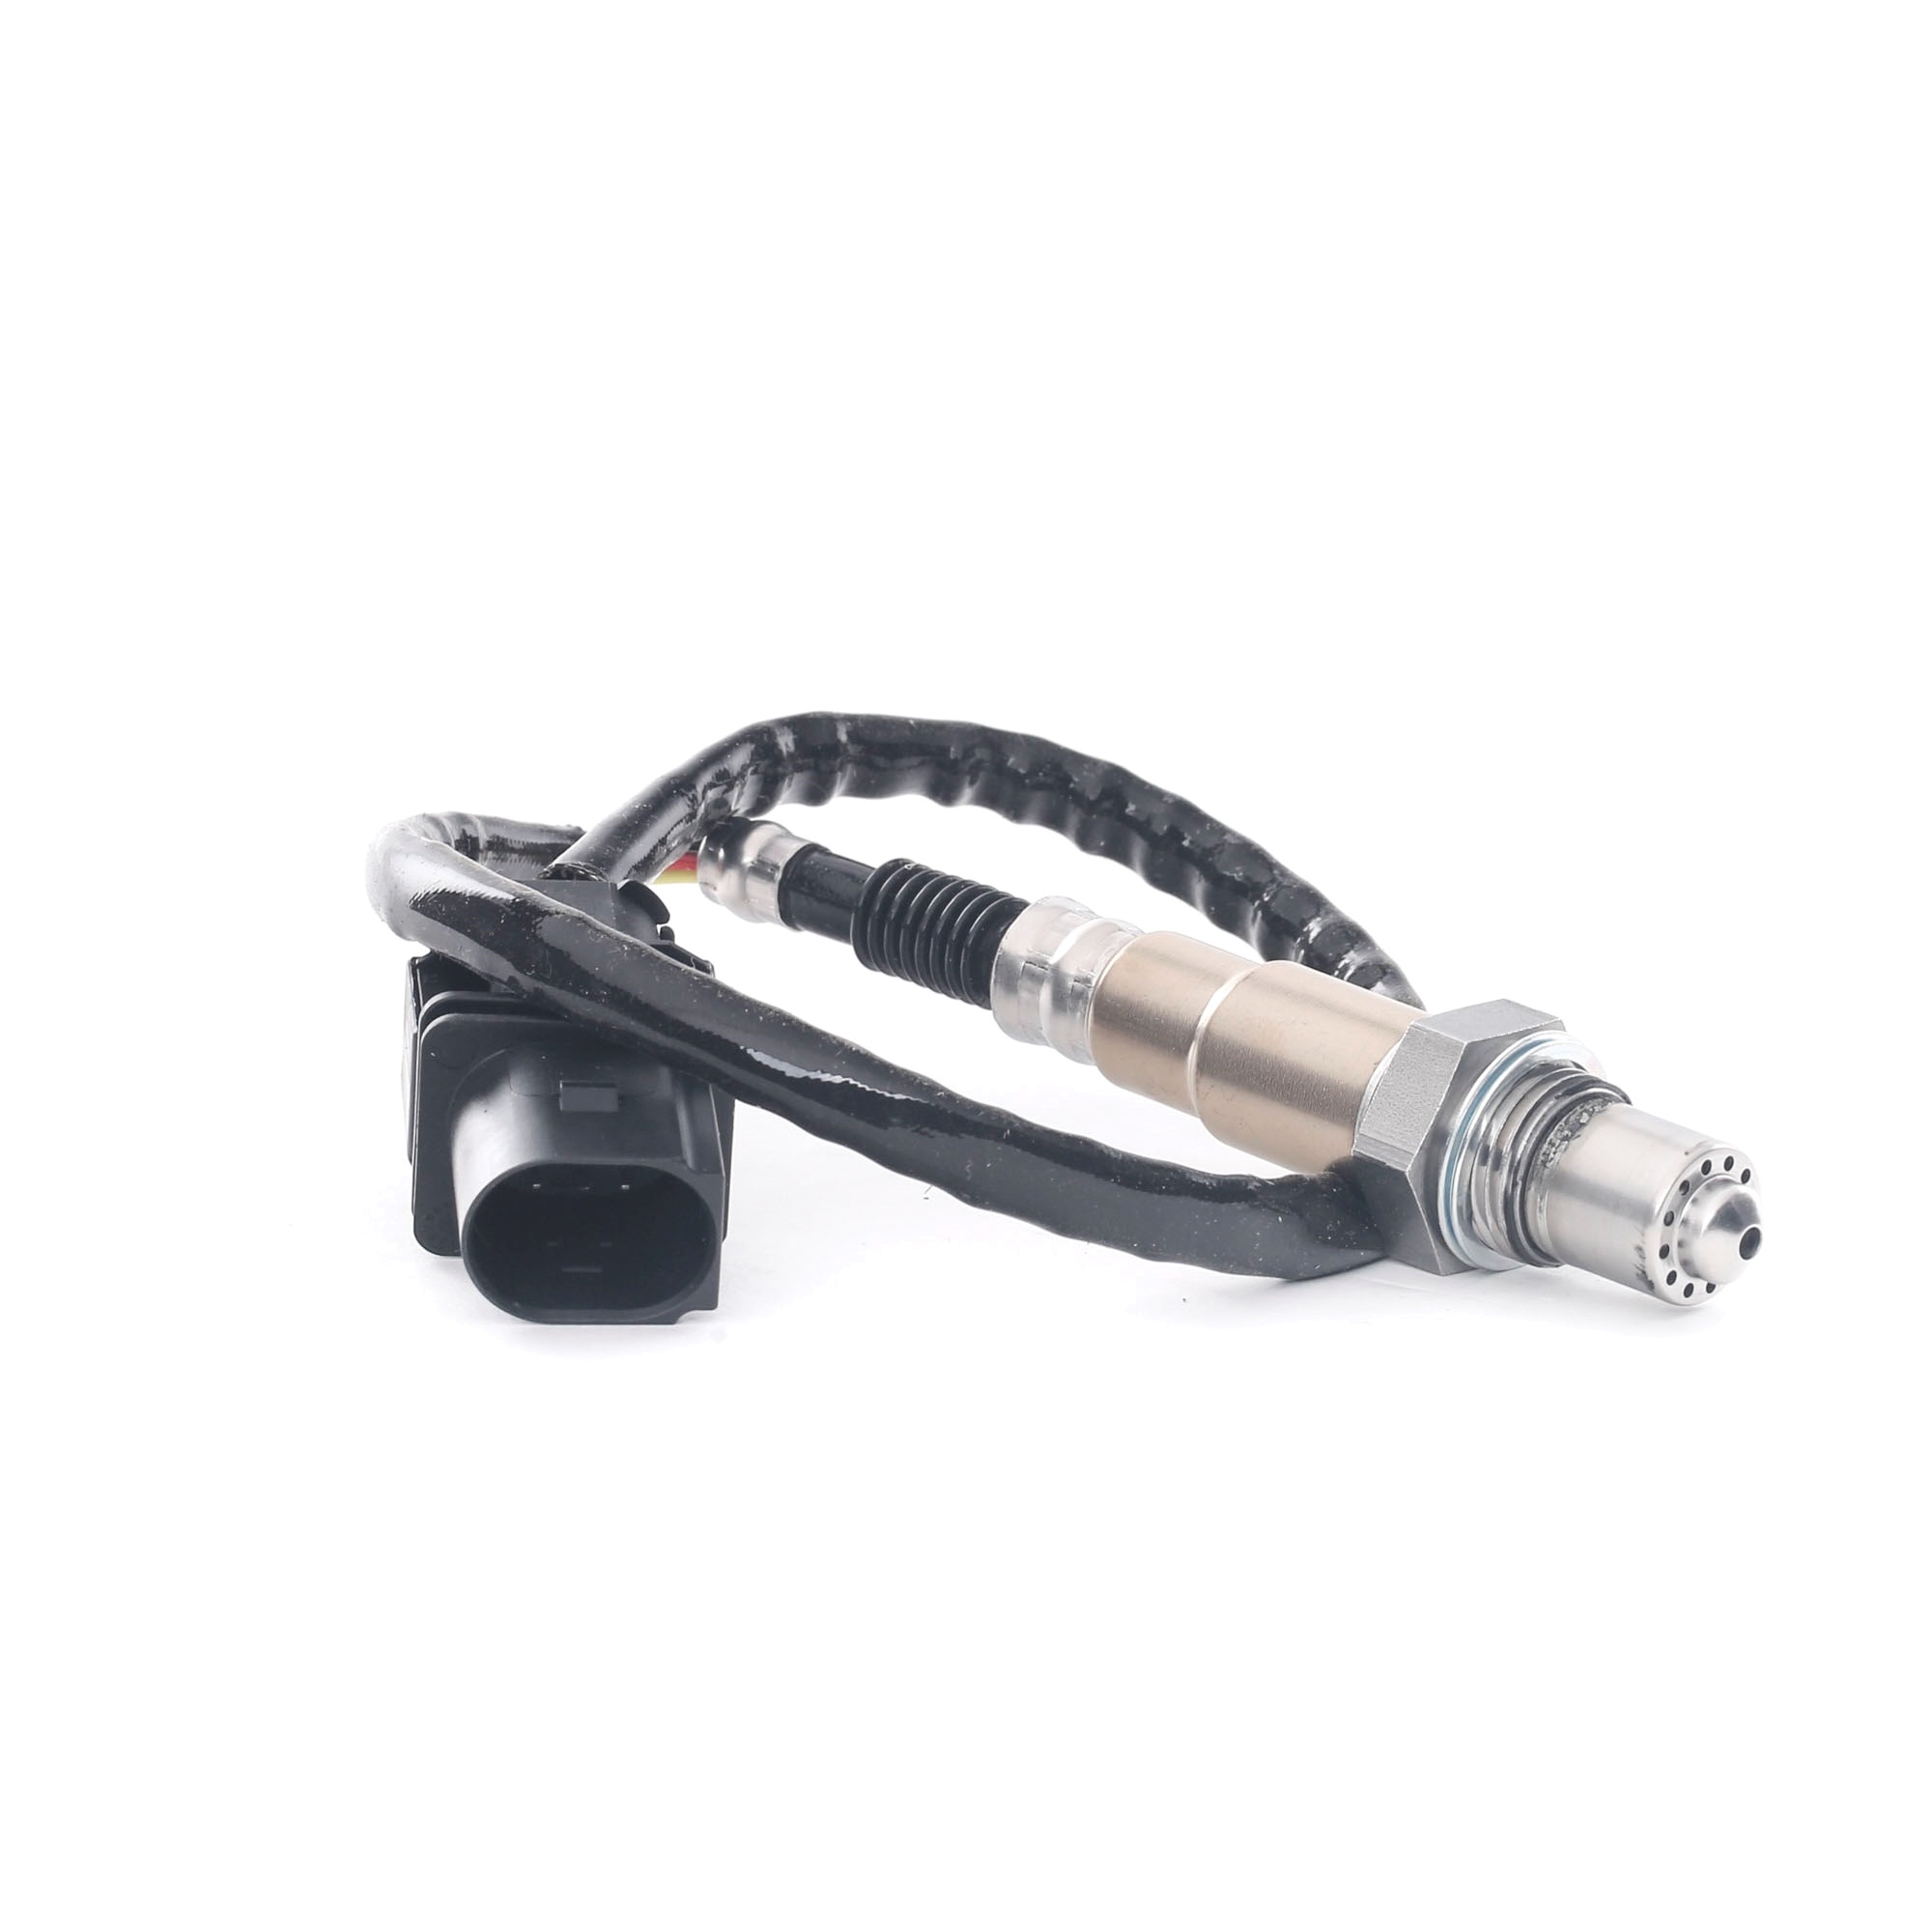 EPS 1.998.406 FACET with fastening material, Heated, Planar probe, Broadband lambda sensor, Thread pre-greased, 5 Cable Length: 500mm Oxygen sensor 10.8406 buy